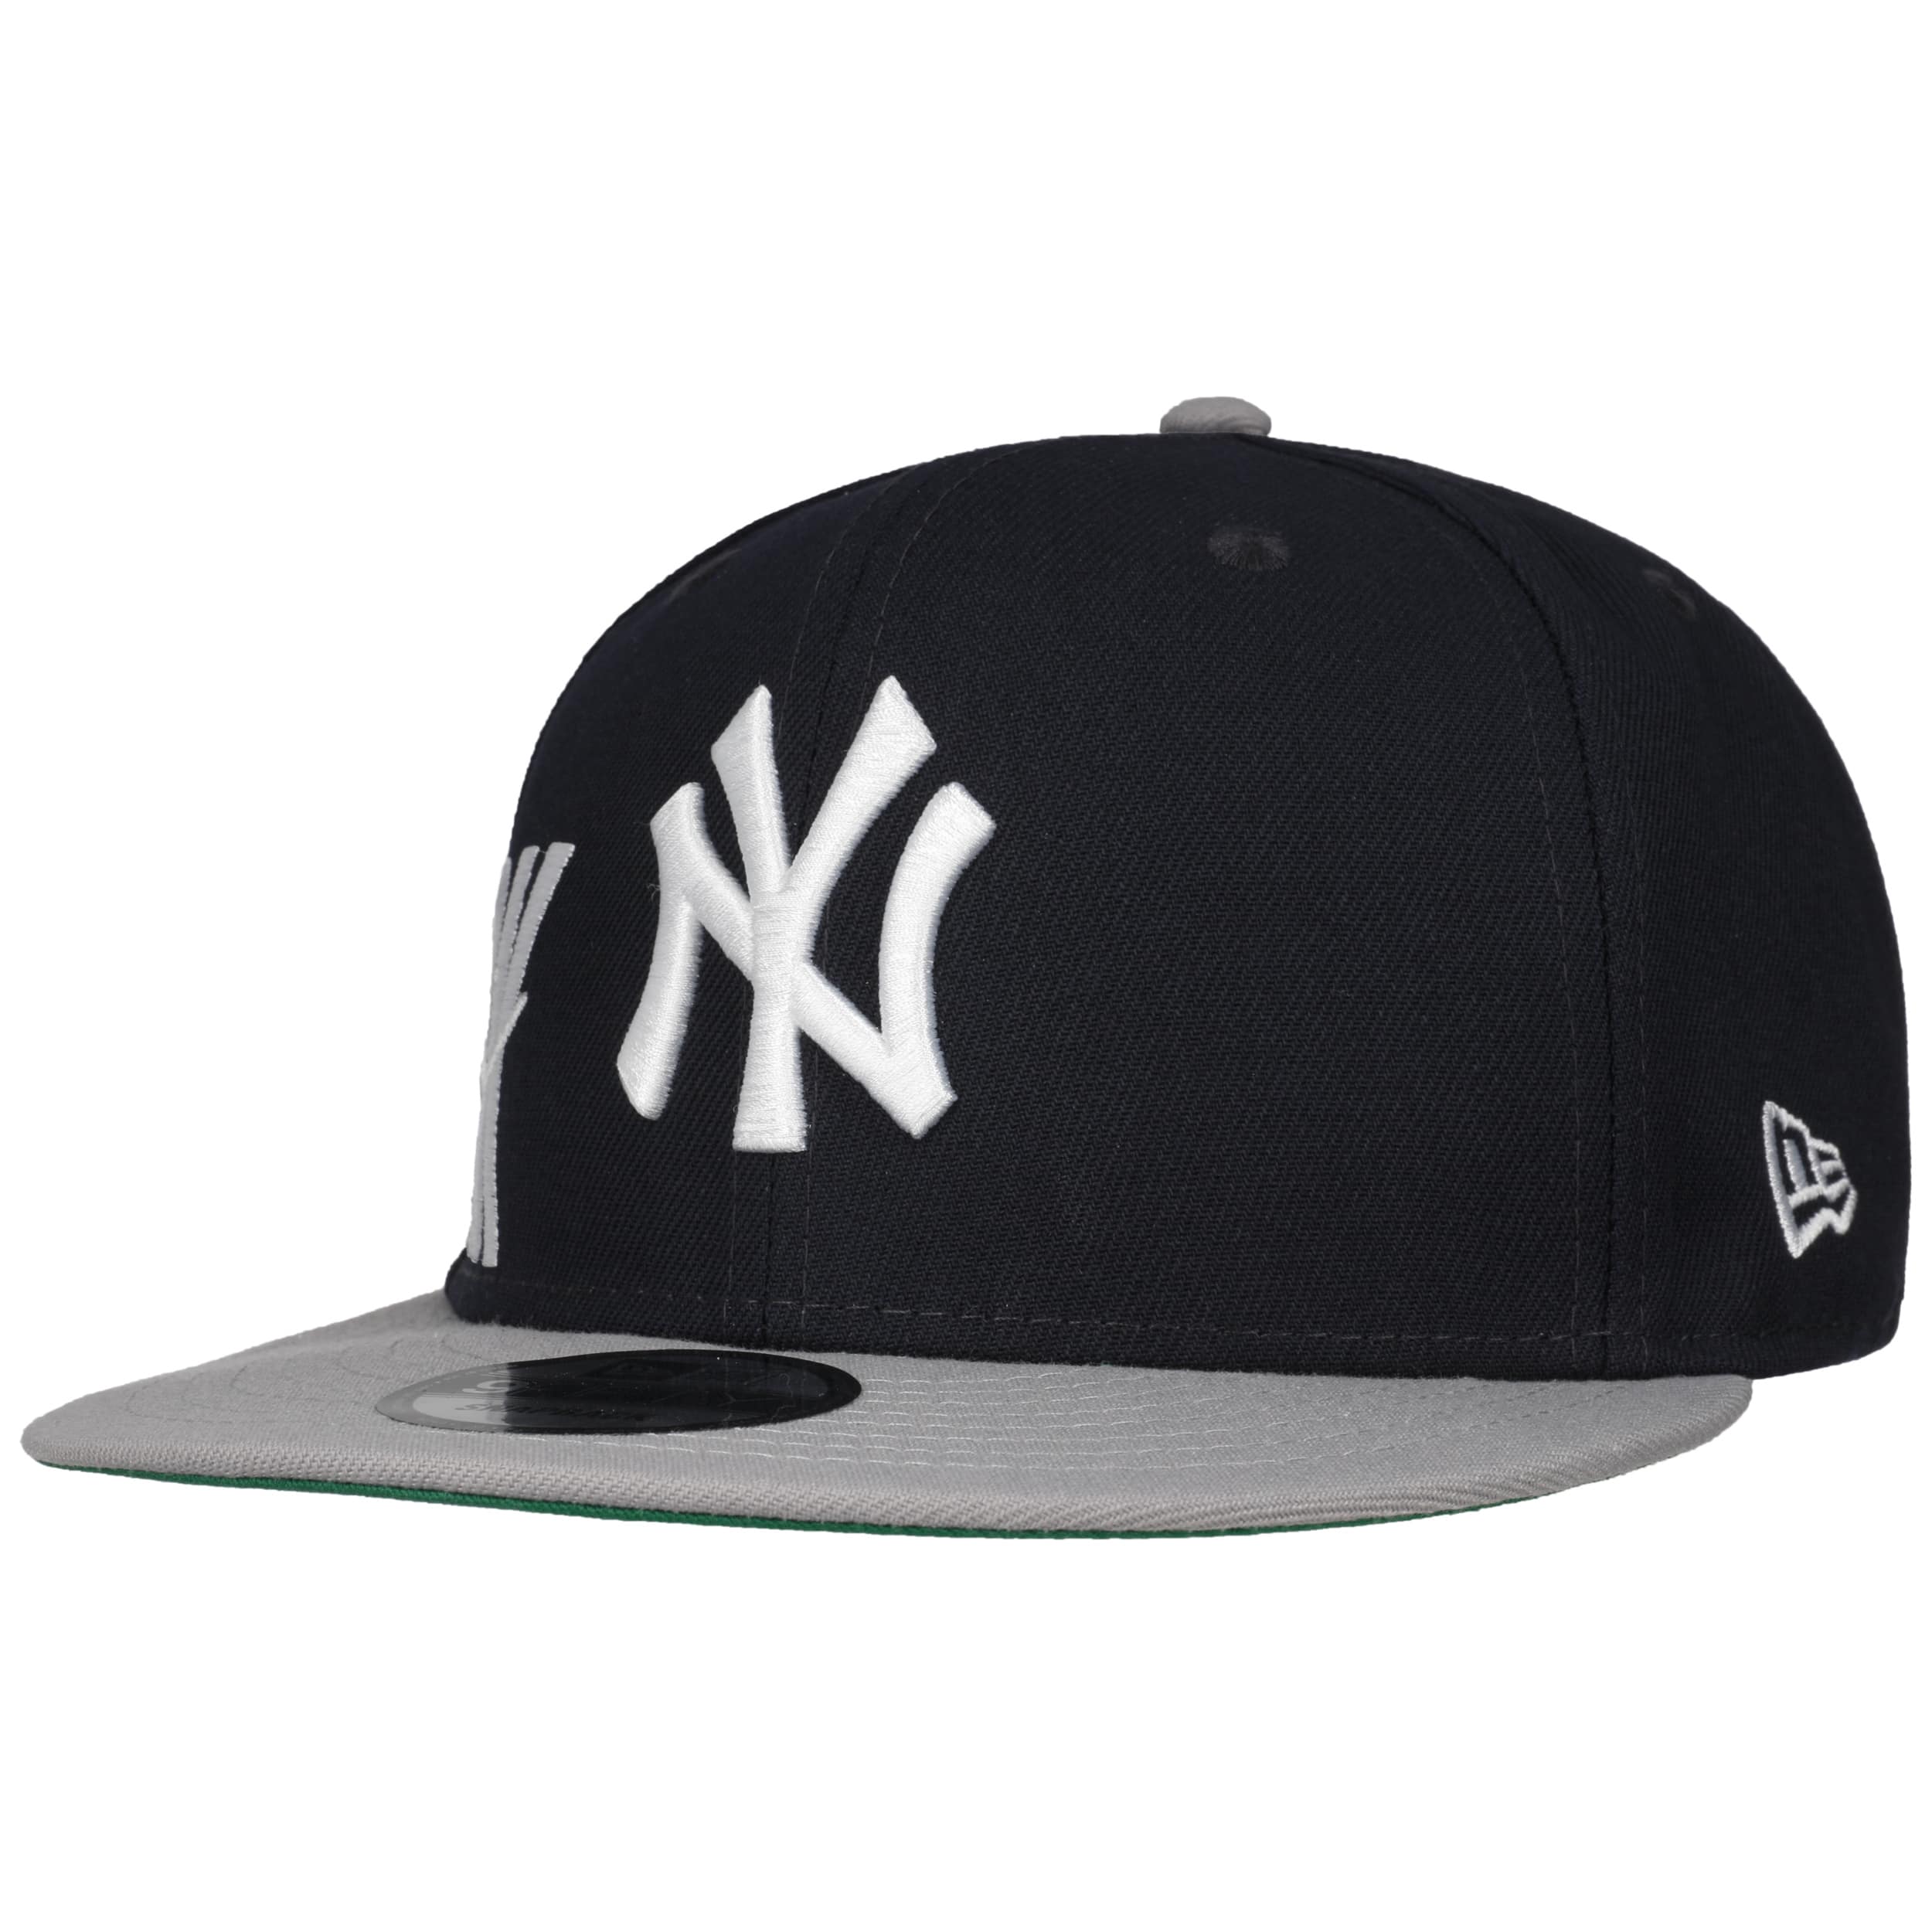 How to Draw a Cap New York Yankees Logo Easy 